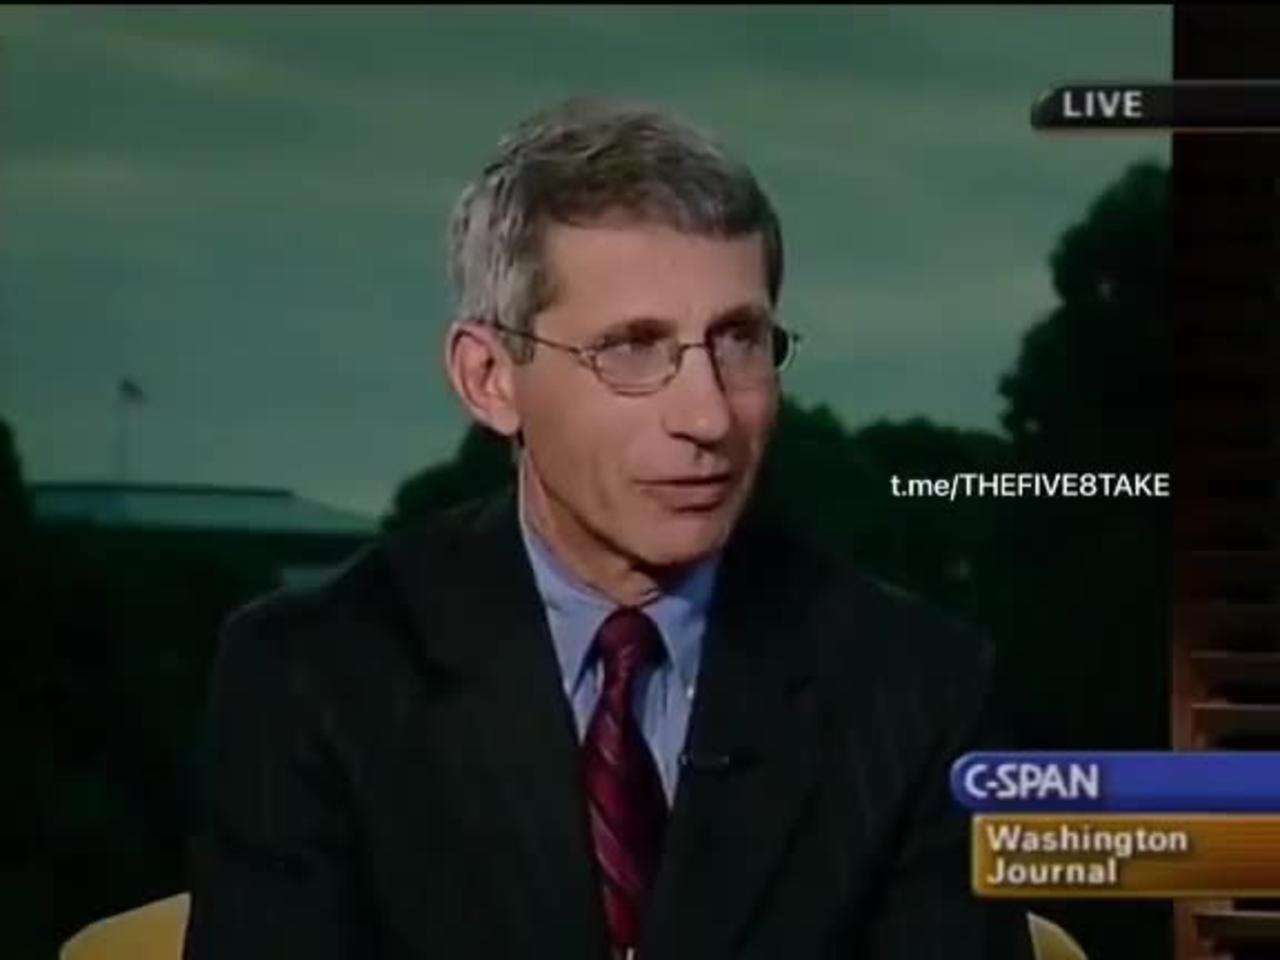 Fauci following the science in 2004: "The most potent vaccination is getting infected yourself"